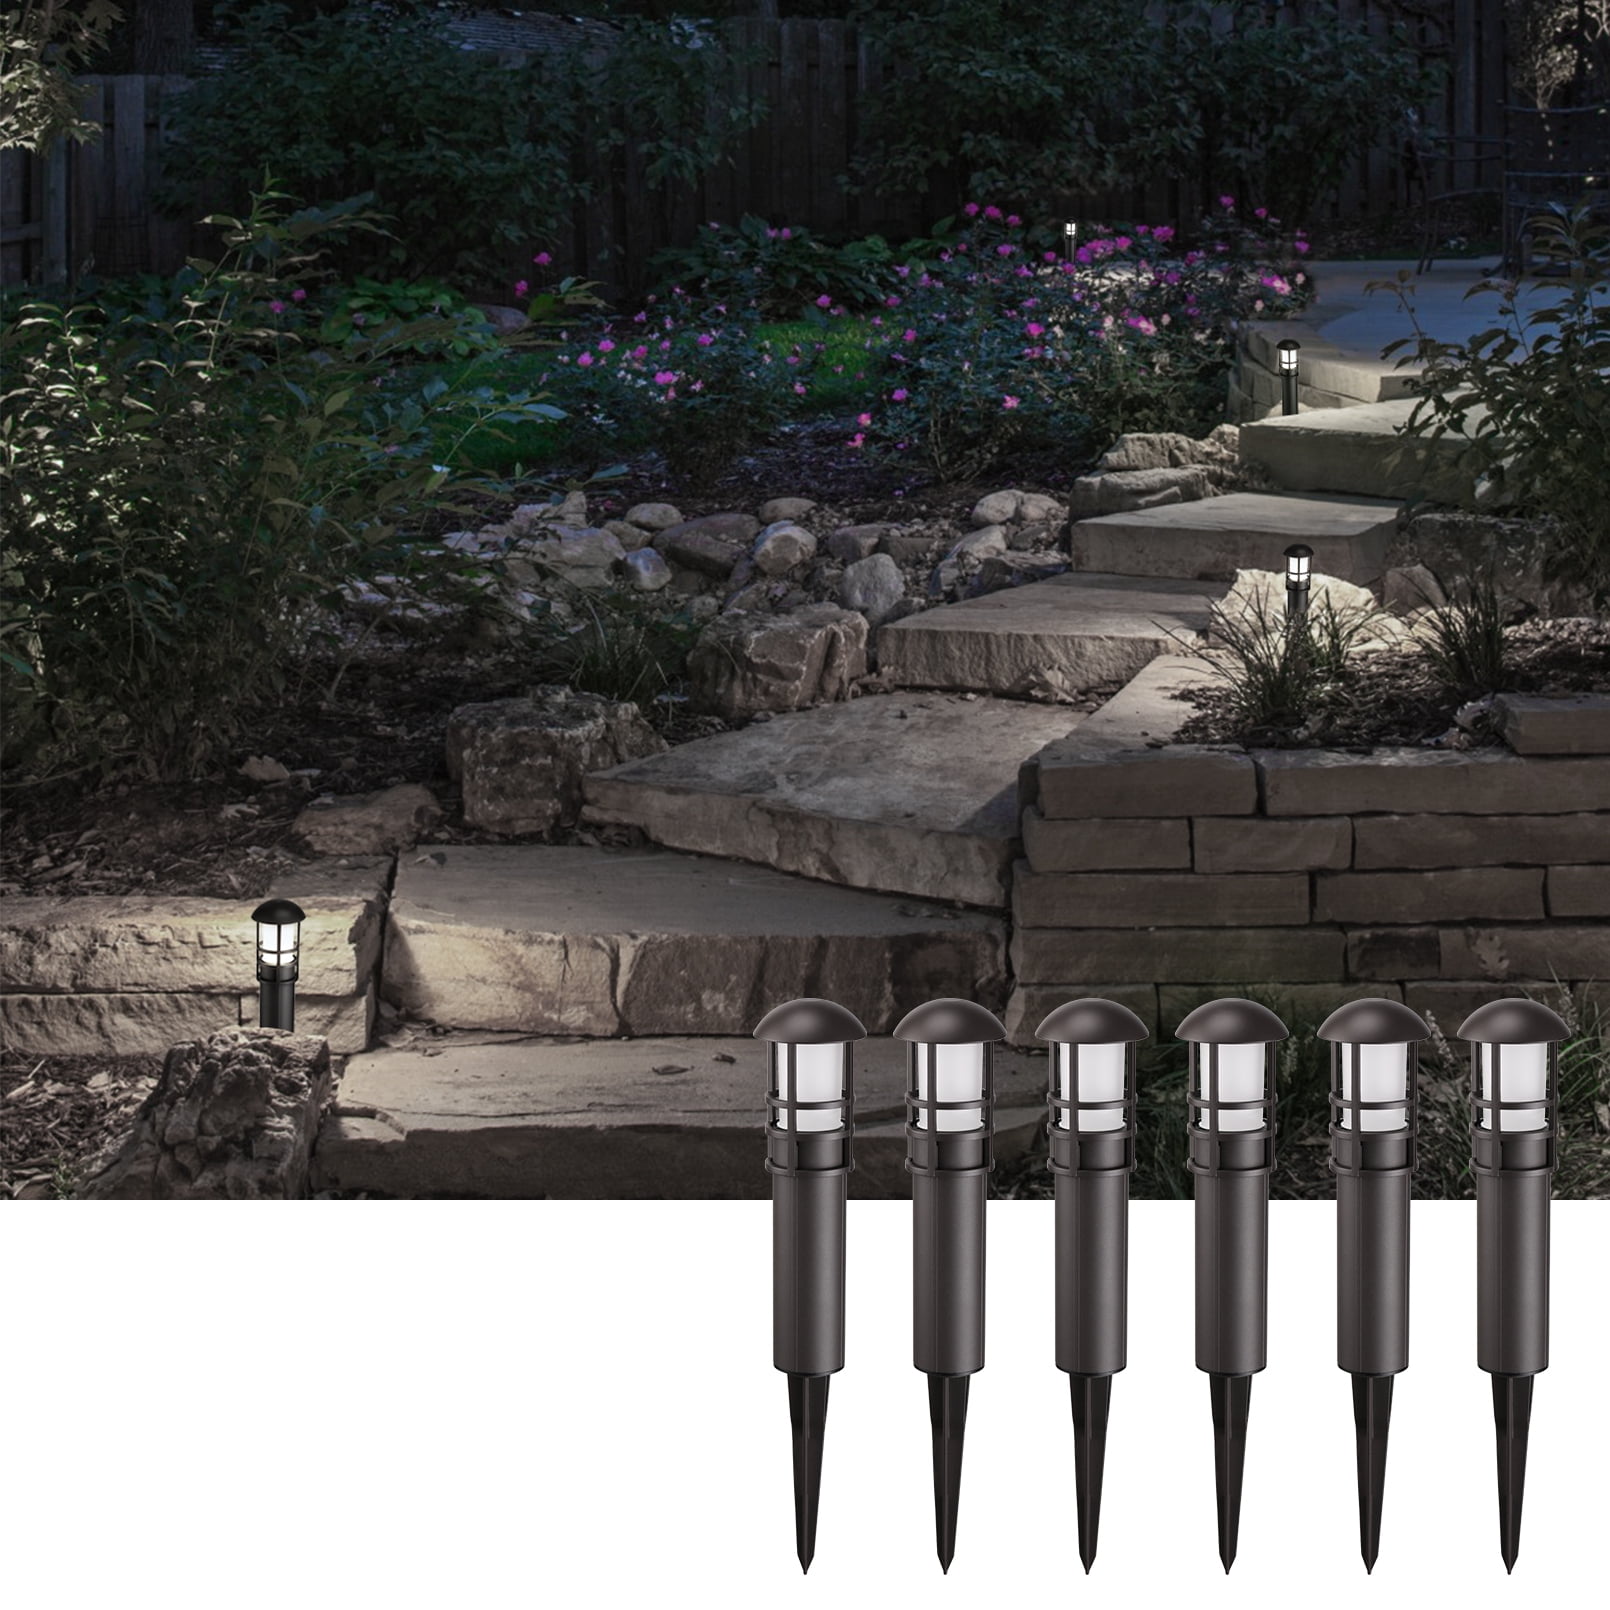 Details about   Low Voltage Path Lights 6 Pack Outdoor Landscaping Light Garden Waterproof LED